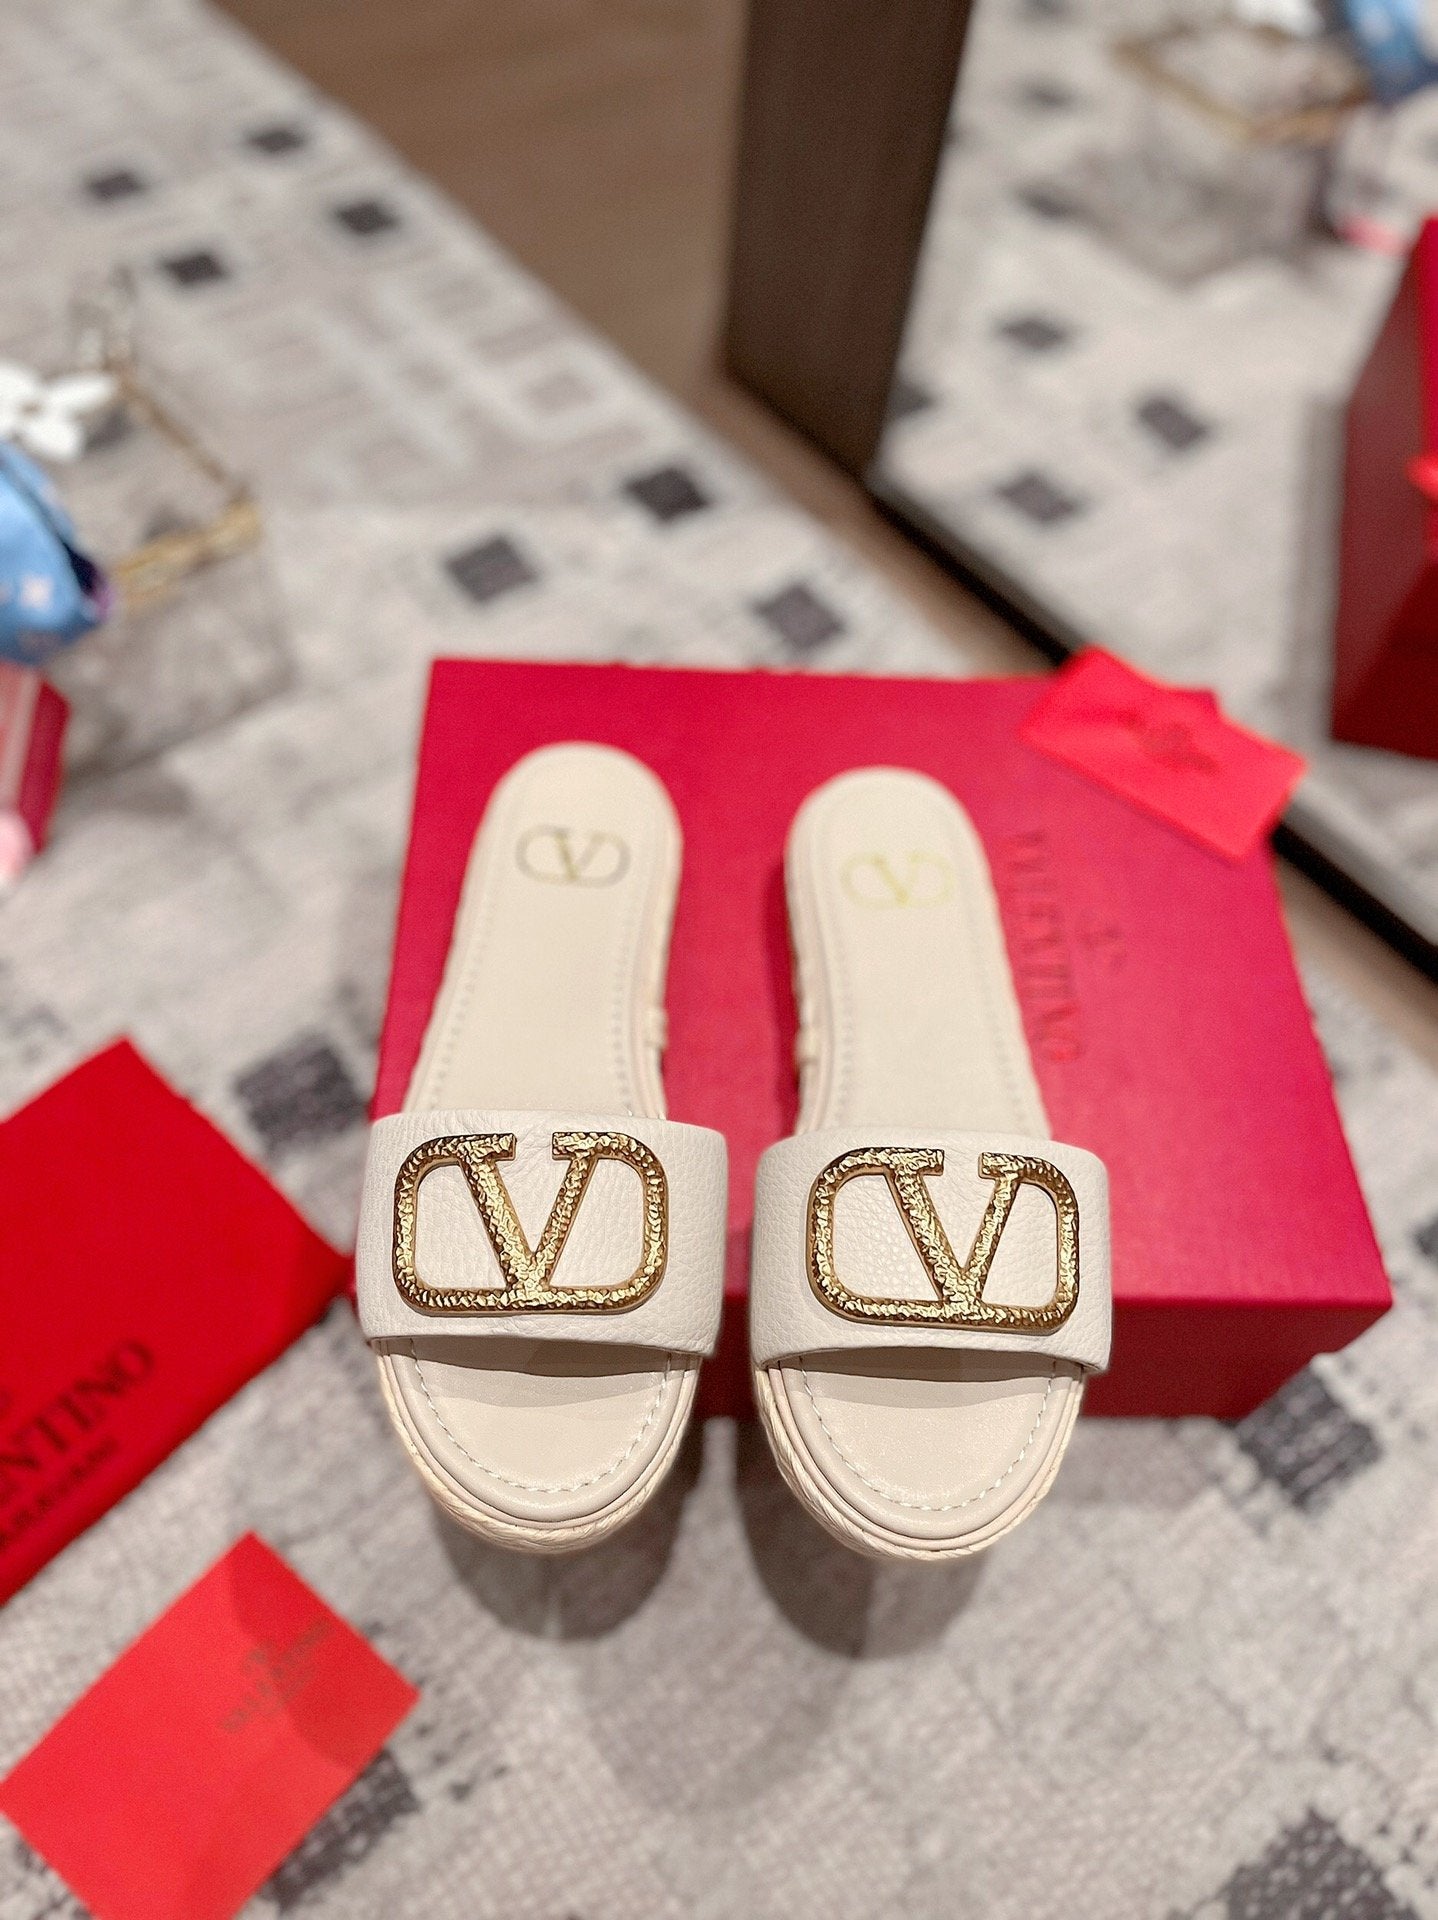 Valentino Women's 2022 NEW ARRIVALS Slippers Sandals Shoes